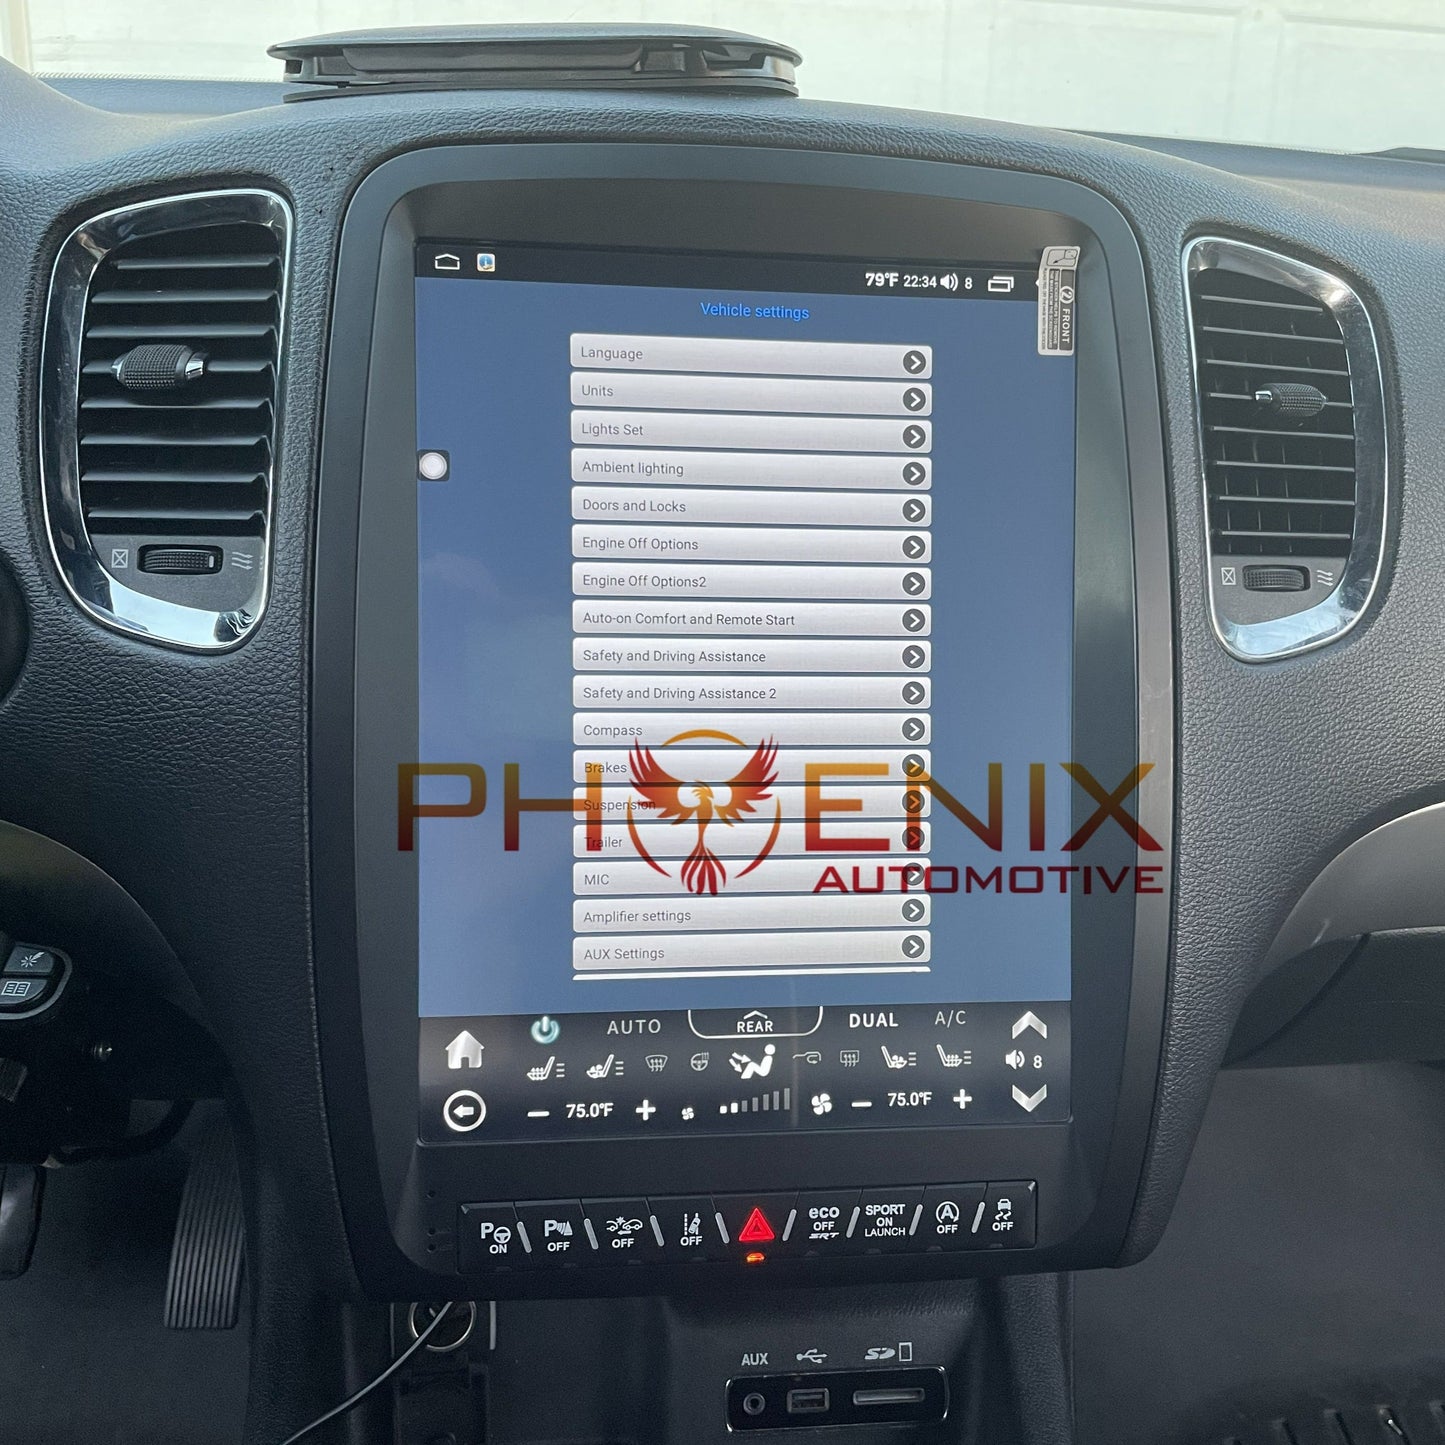 [Open box] 13” Android 10 Vertical Screen Navigation Radio for Dodge Durango 2011 - 2020 - Smart Car Stereo Radio Navigation | In-Dash audio/video players online - Phoenix Automotive